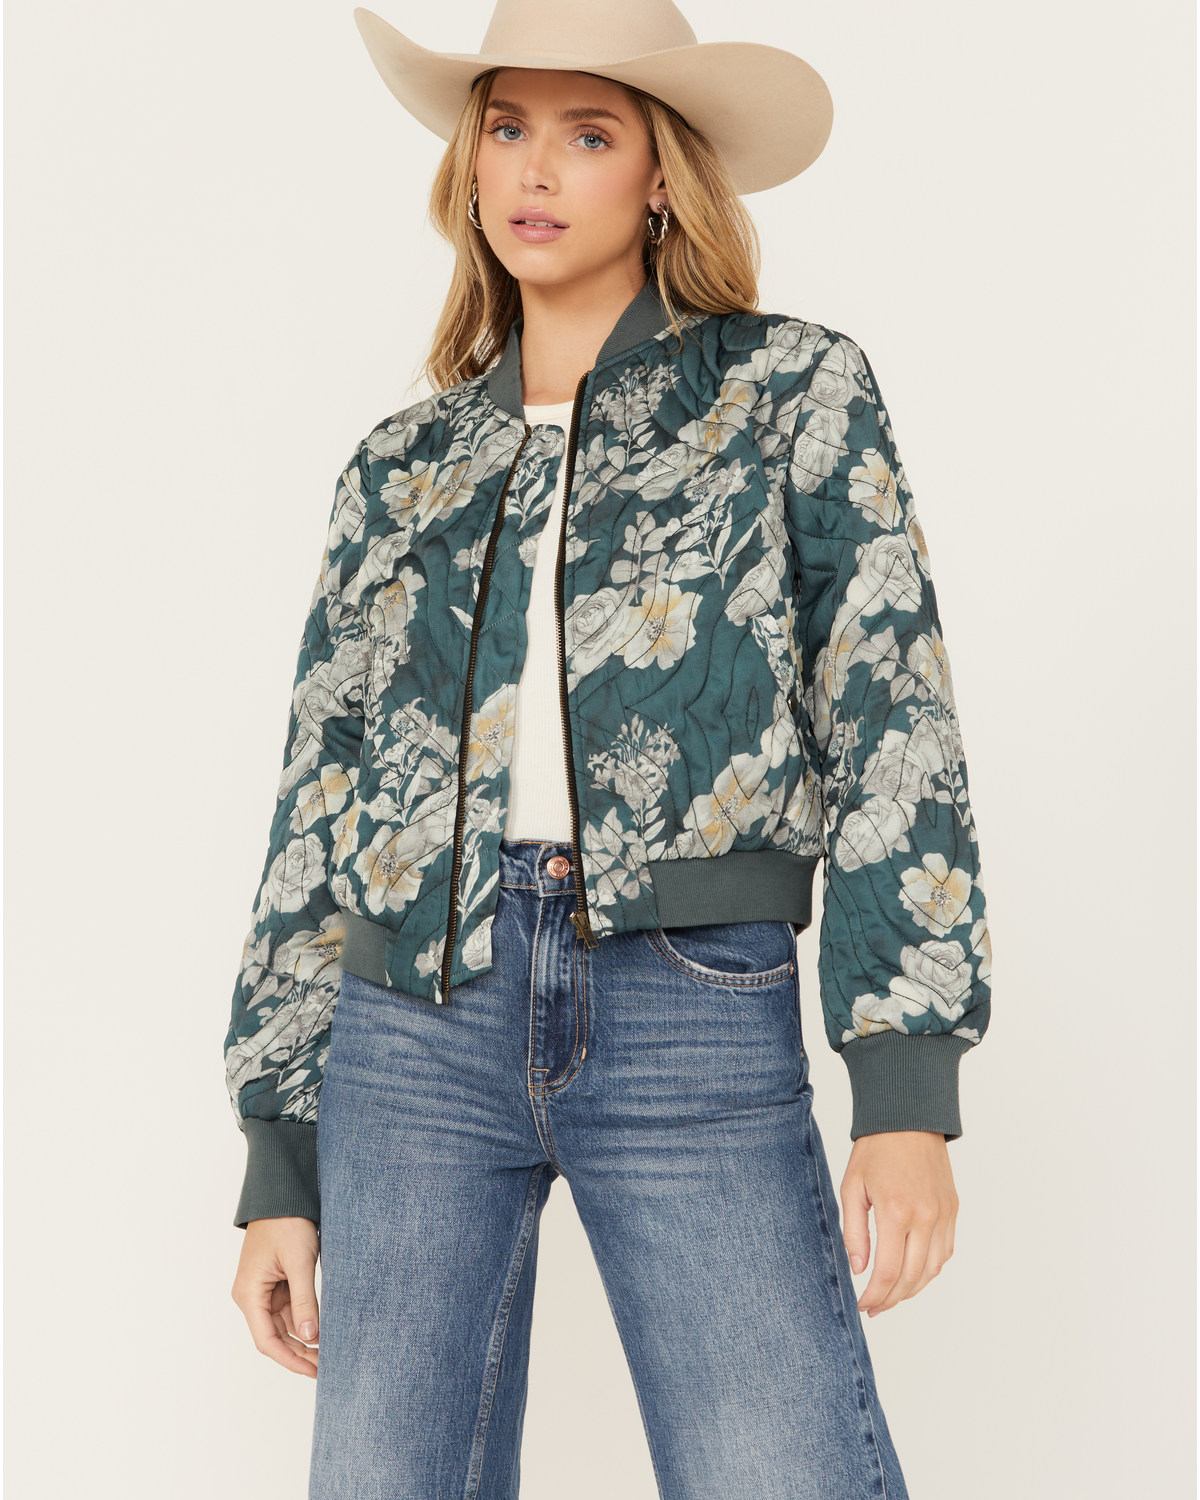 Revel Women's Floral Print Quilted Bomber Jacket